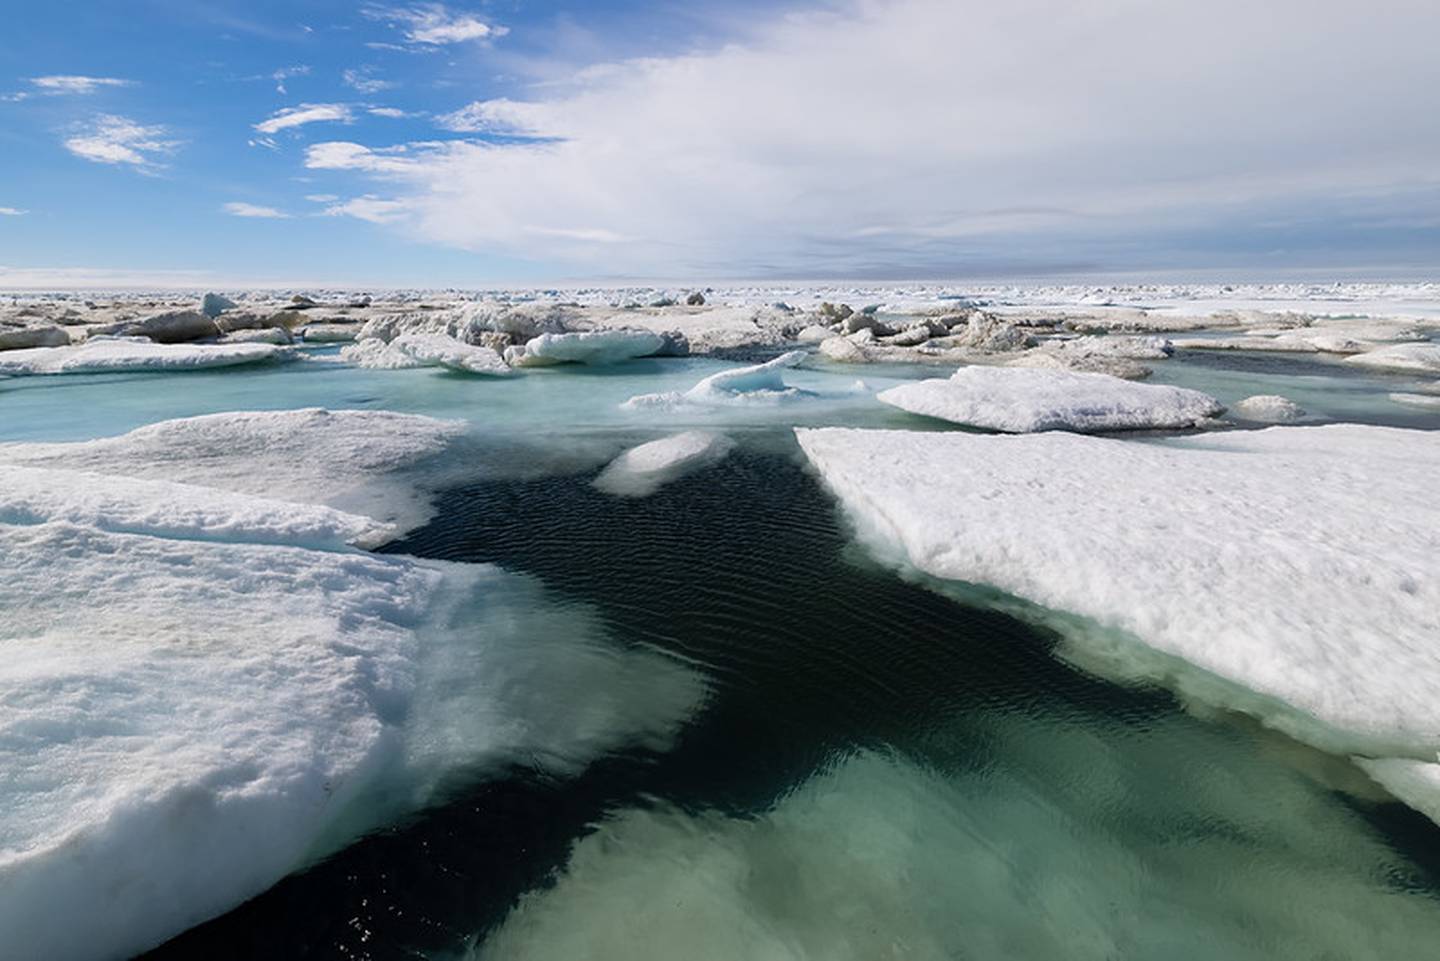 Slabs of sea ice float in the Chukchi Sea in July 2021